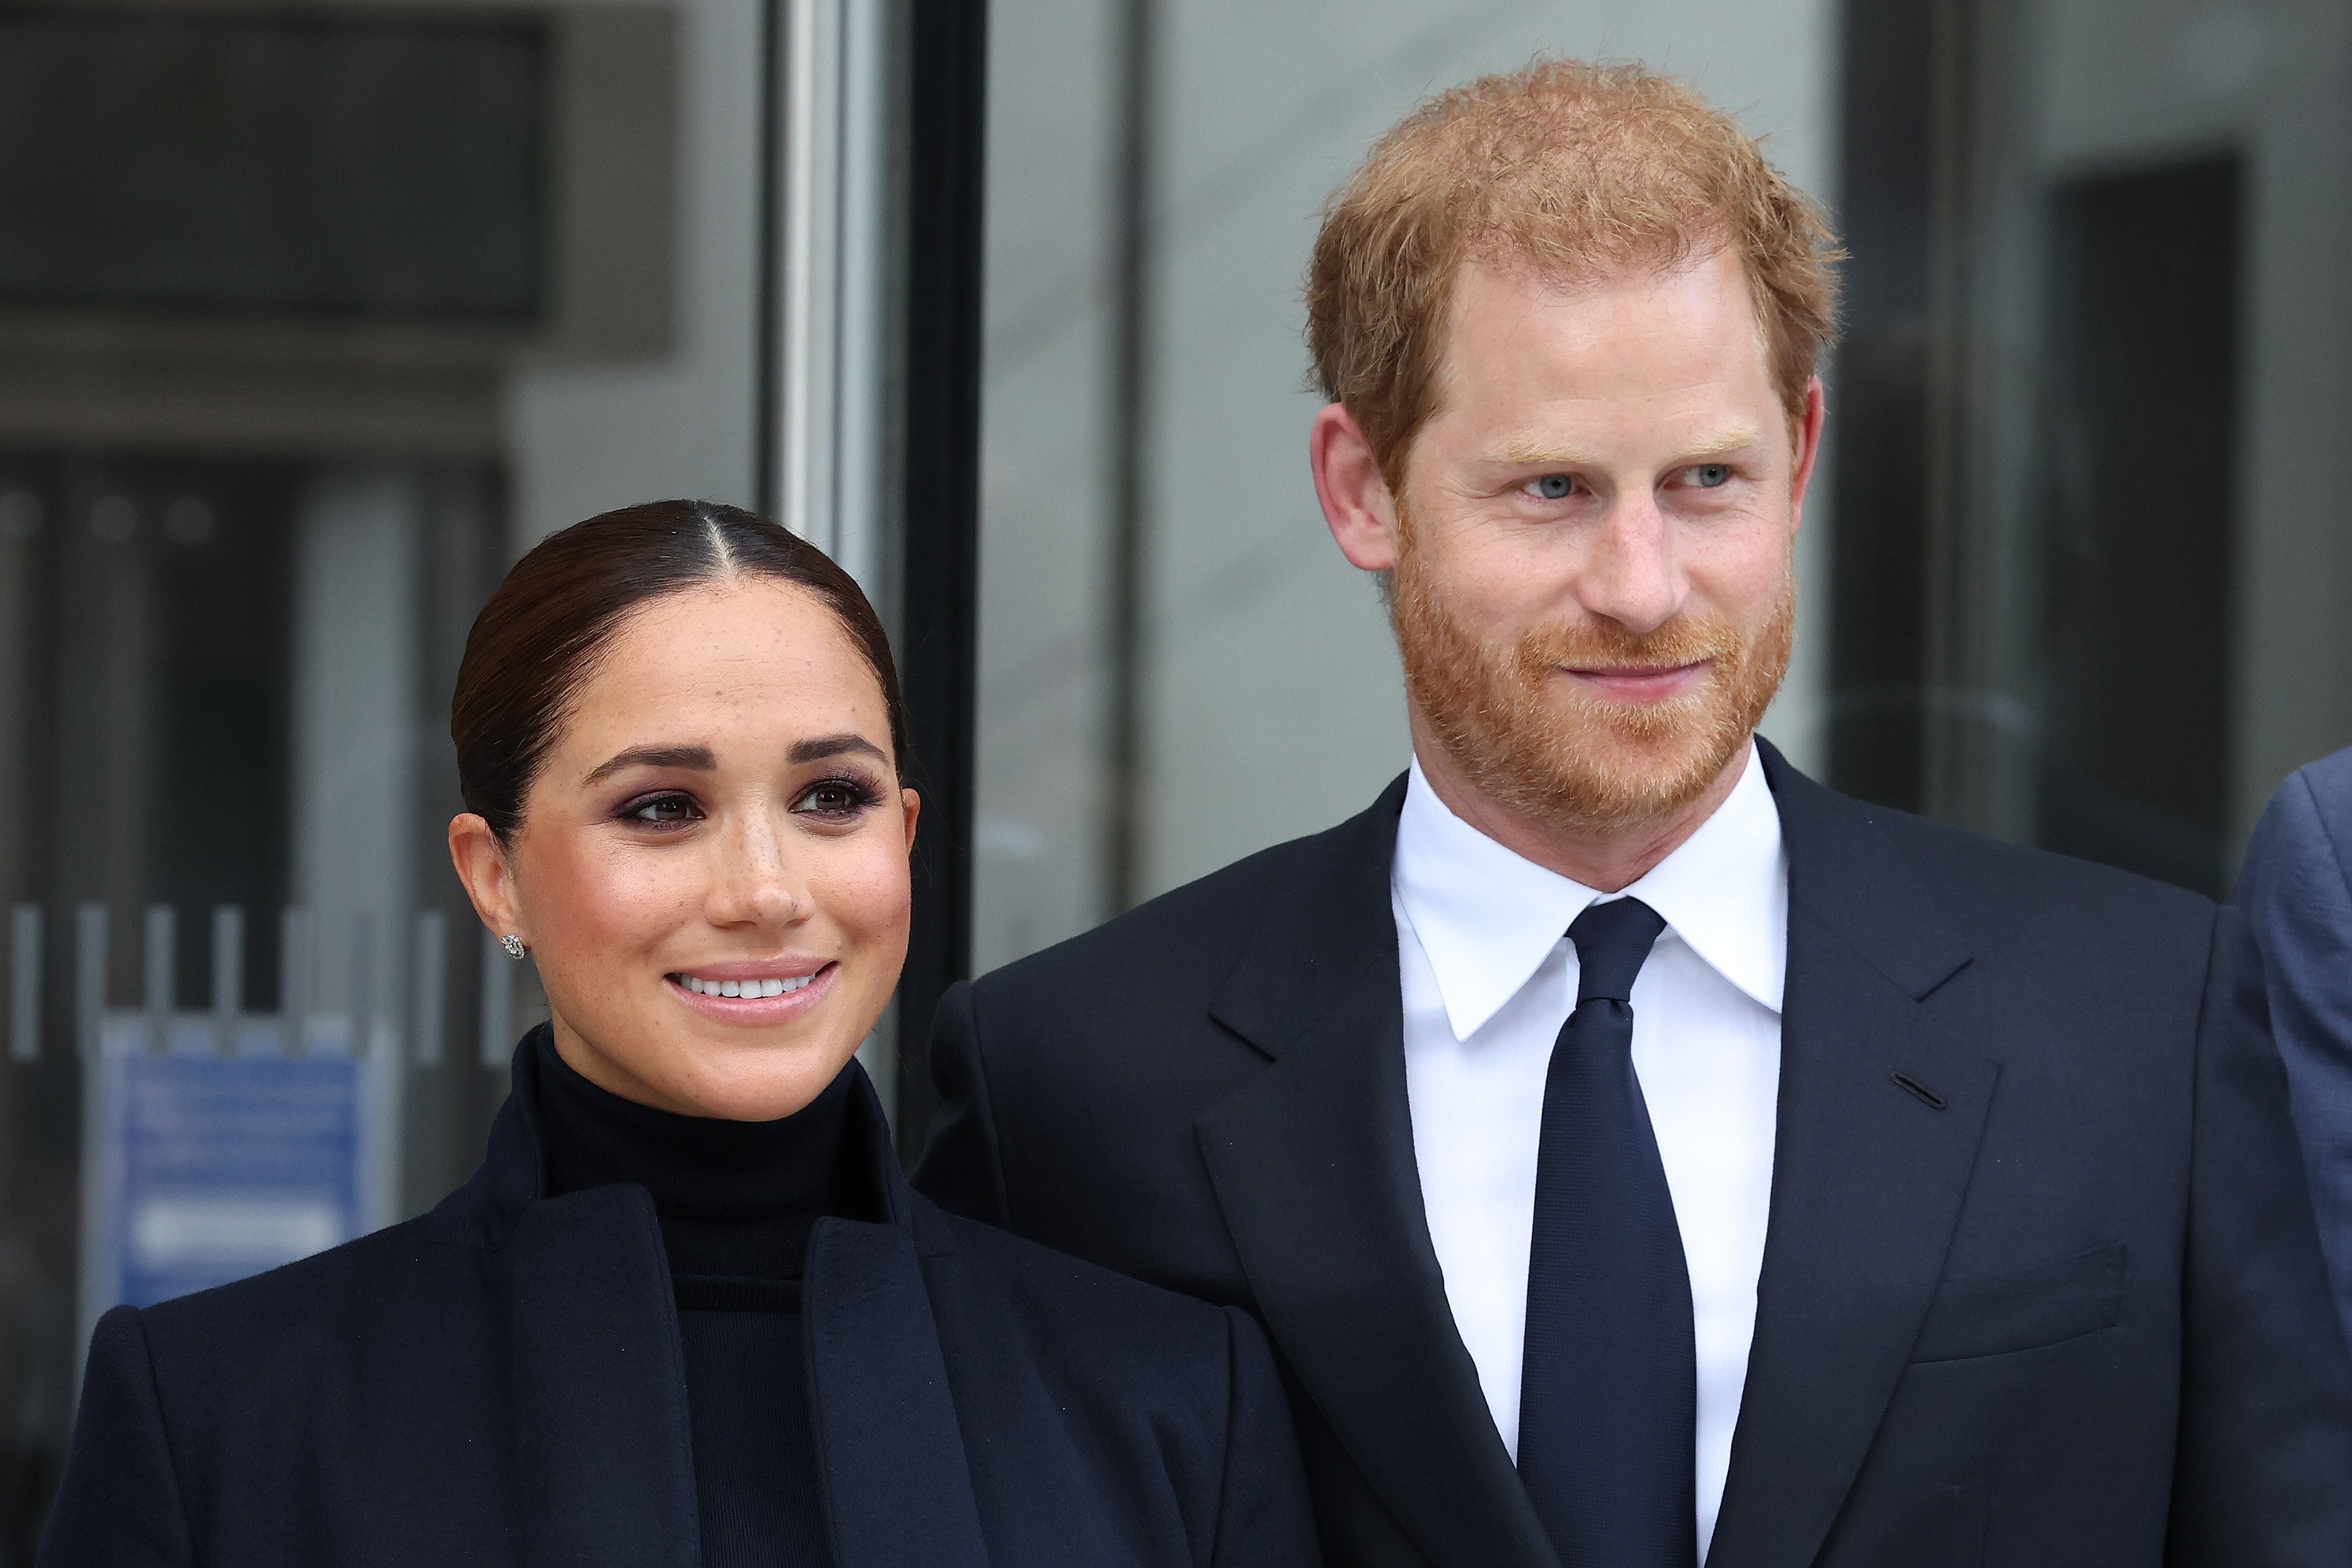 Meghan Markle and Prince Harry visit One World Observatory during NYC trip